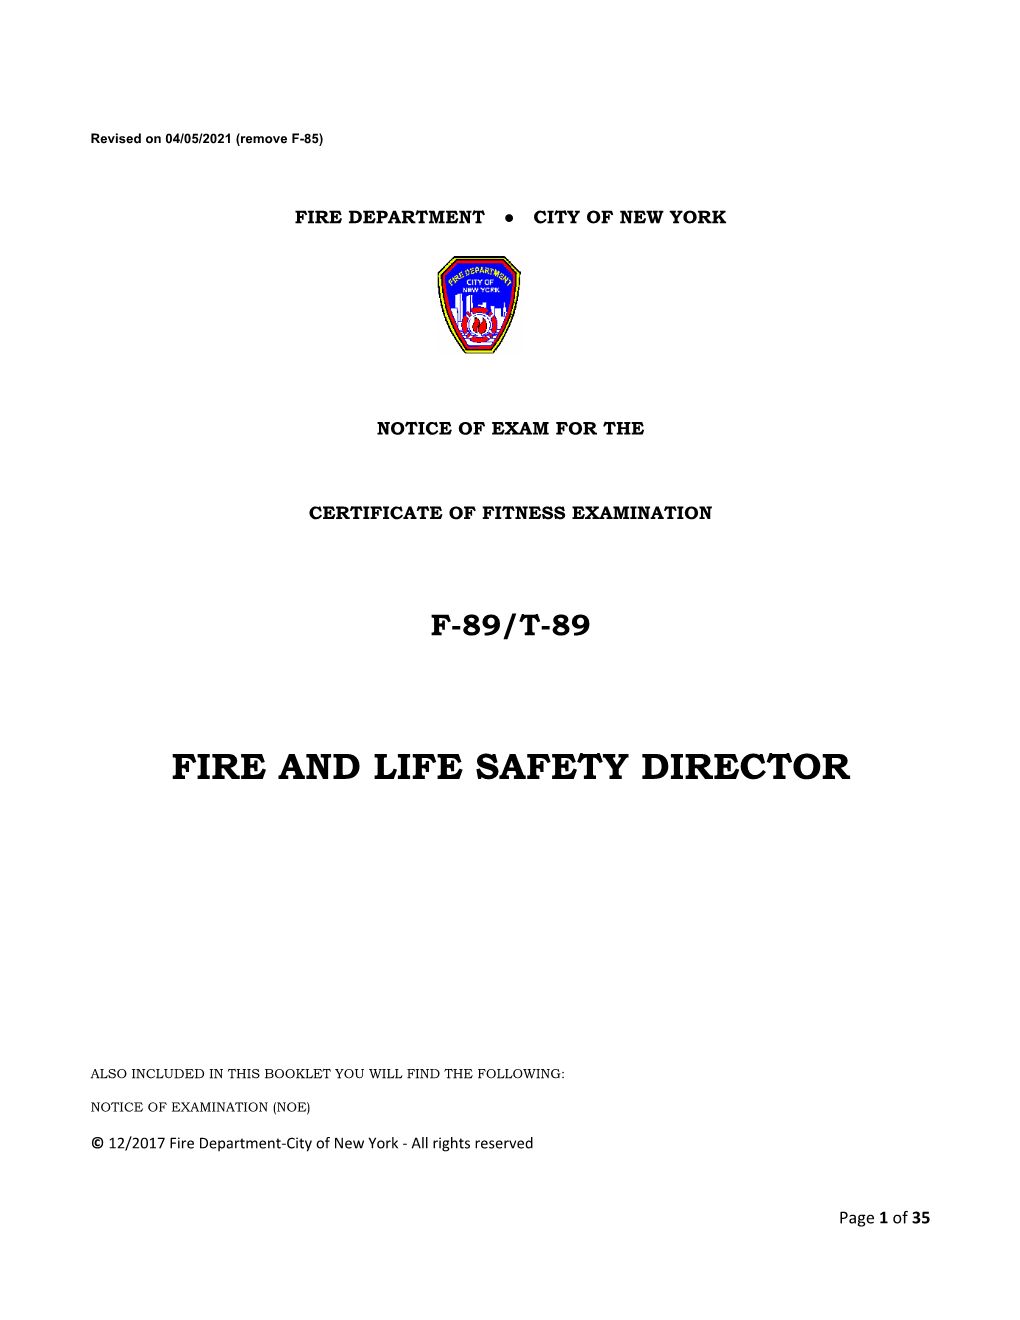 Fire and Life Safety Director